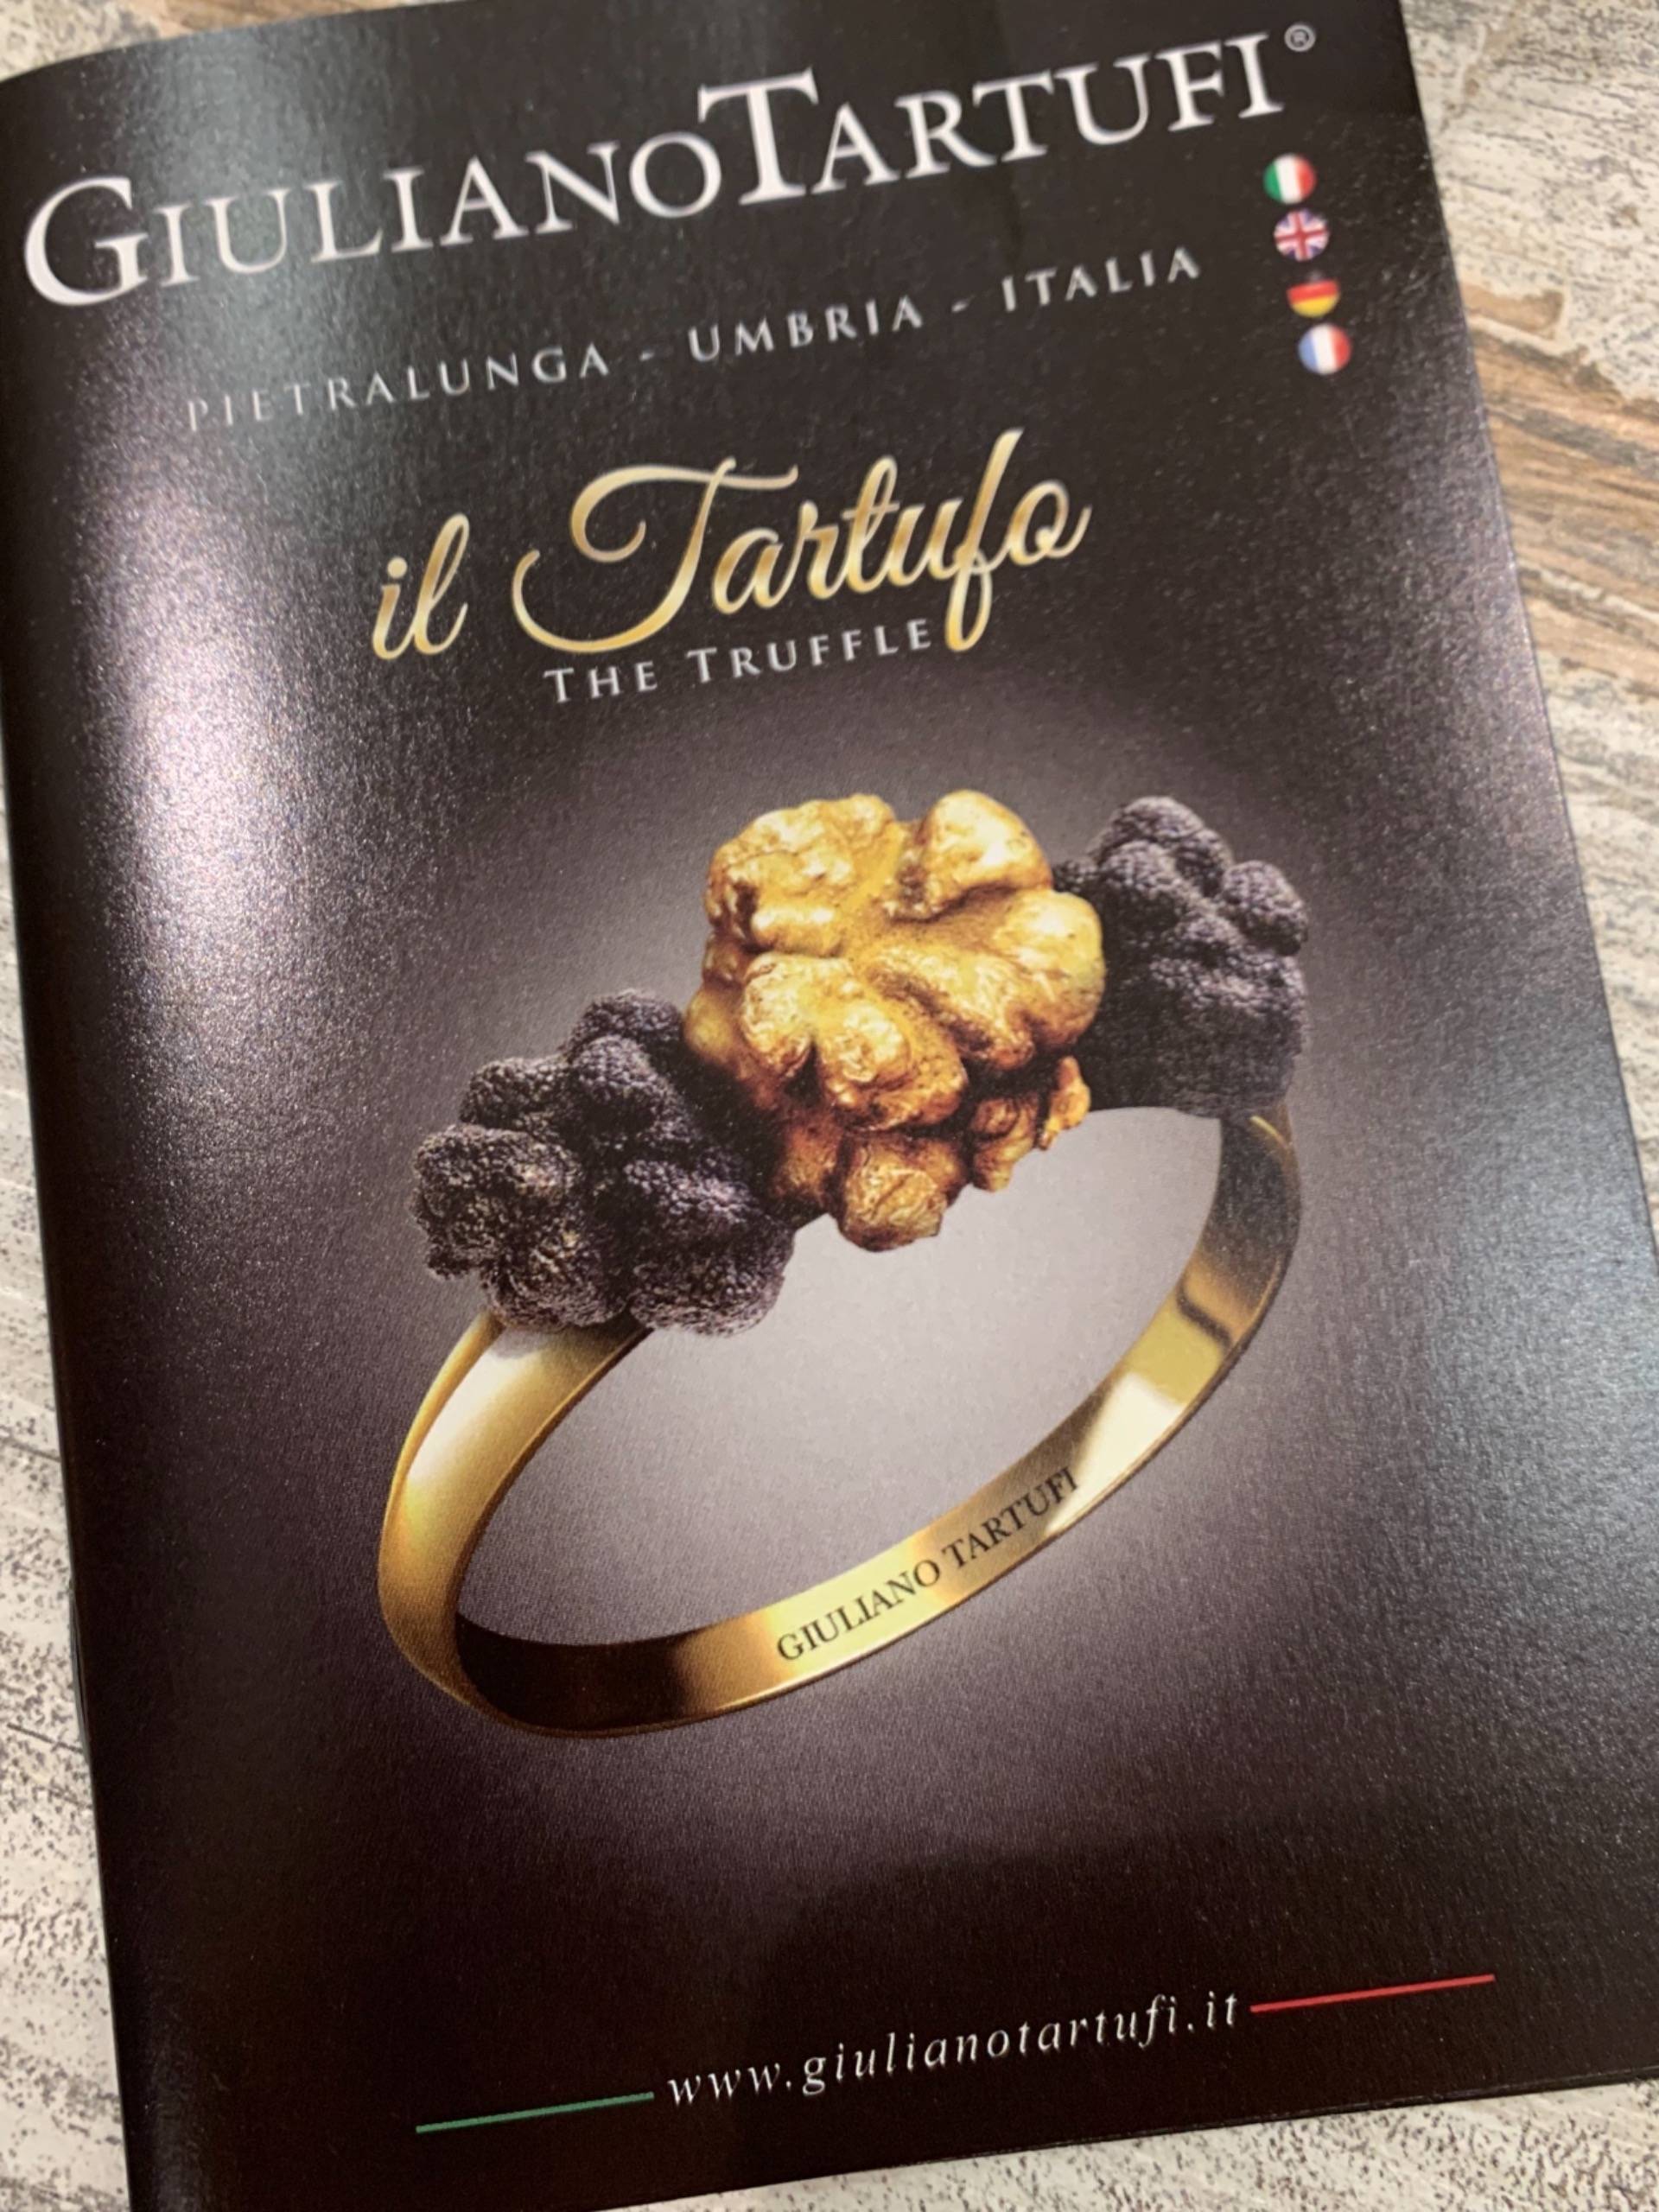 THE TRUFFLE EXPERIENCE IN ITALY